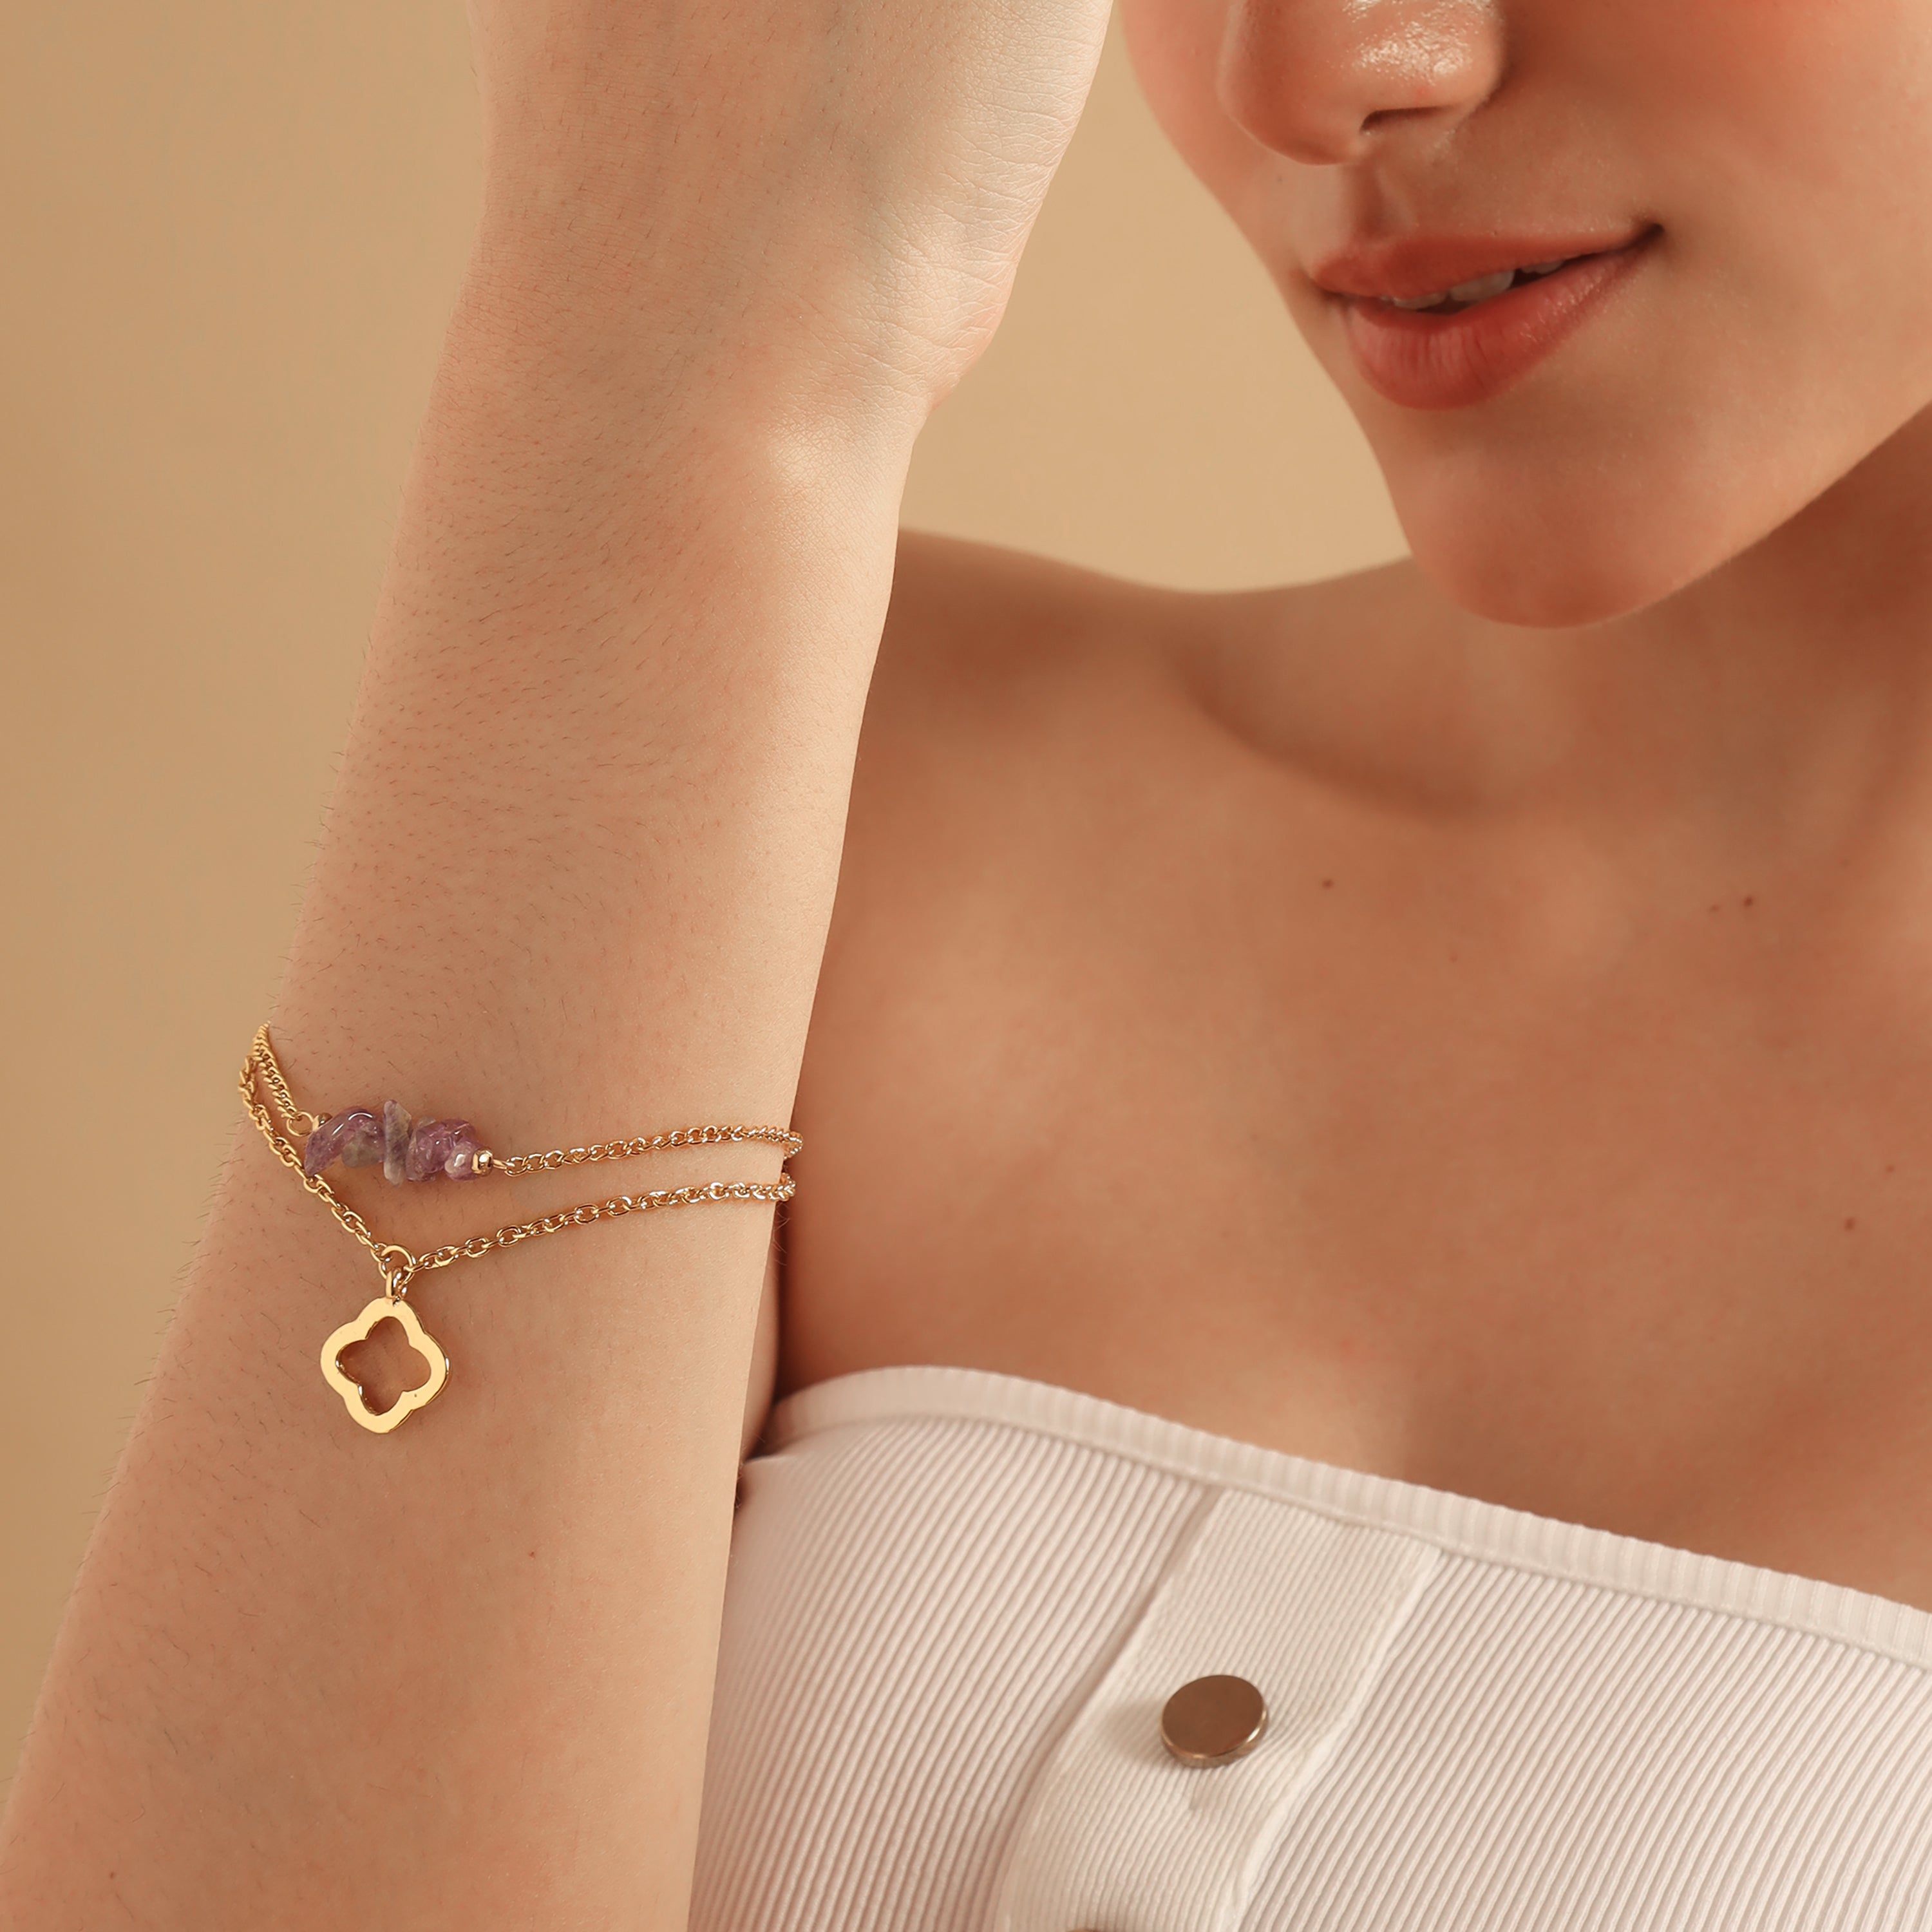 TFC Amethyst Stone Clover Charm Gold Plated Stacked bracelet-Discover our stunning collection of stylish bracelets for women, featuring exquisite pearl bracelets, handcrafted beaded bracelets, and elegant gold-plated designs. Enjoy cheapest anti-tarnish fashion jewellery and long-lasting brilliance only at The Fun Company